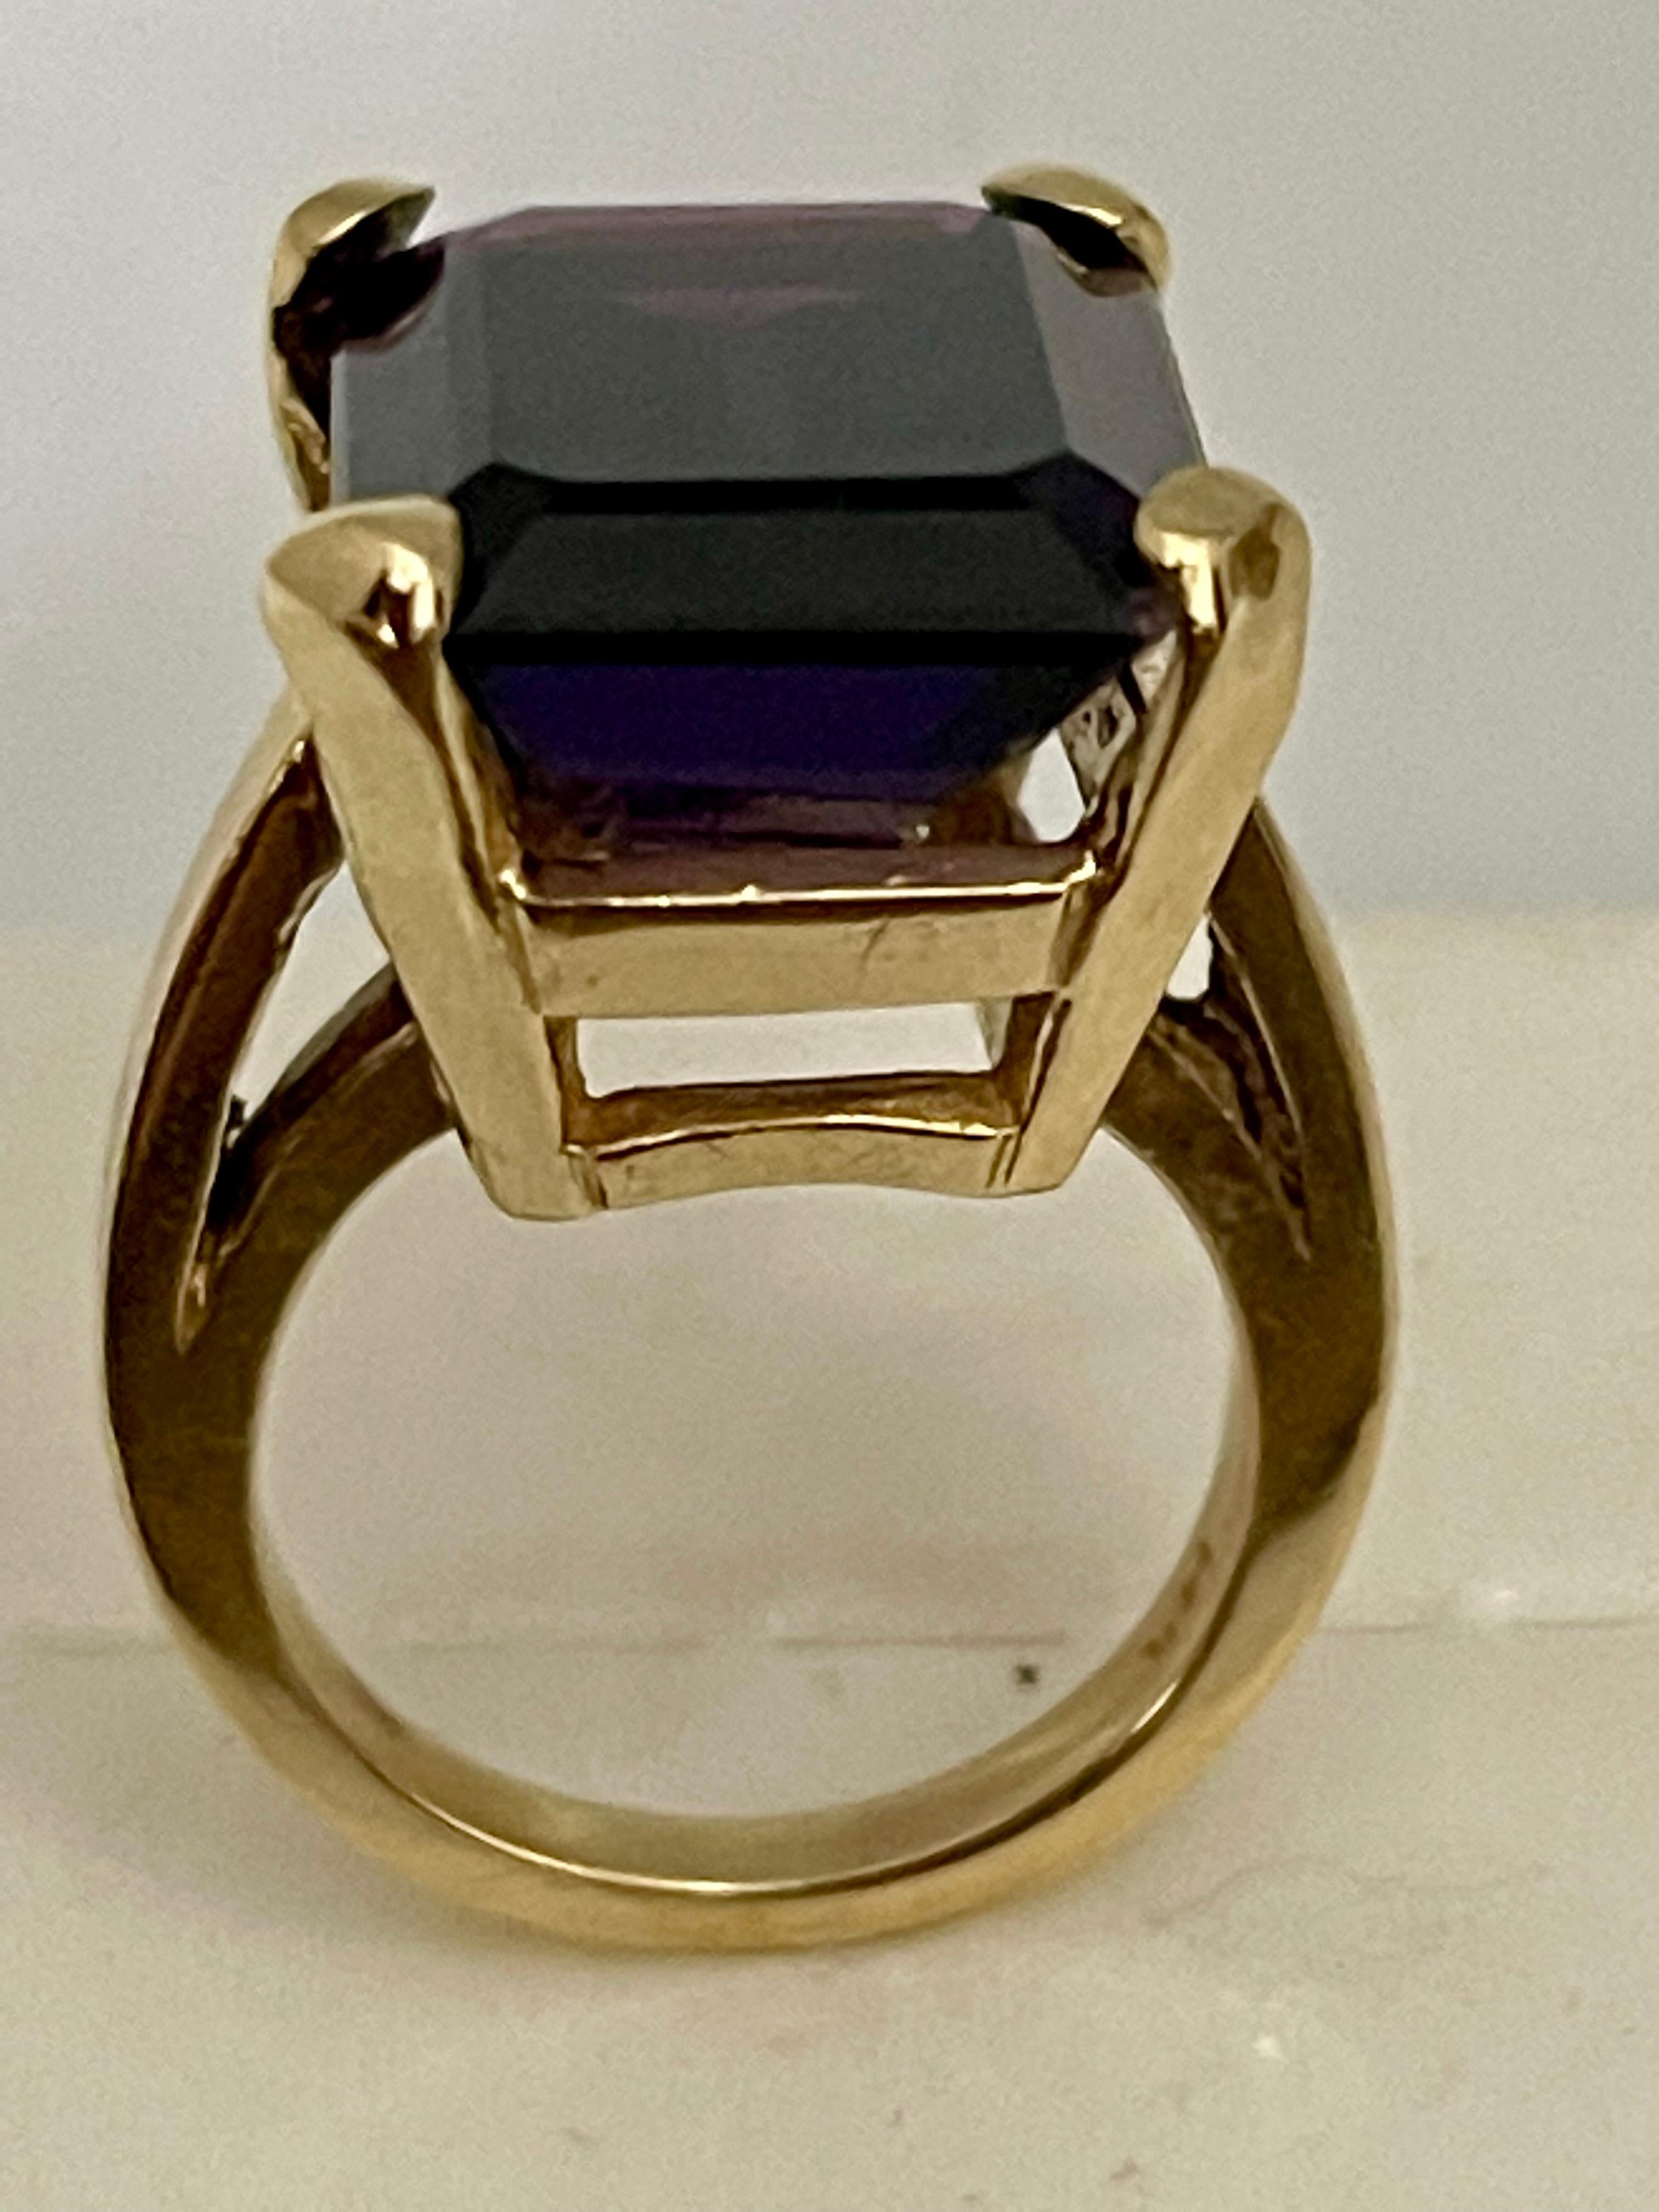 15 Carat Emerald Cut Amethyst Cocktail Ring in 14 Karat Yellow Gold For Sale 4